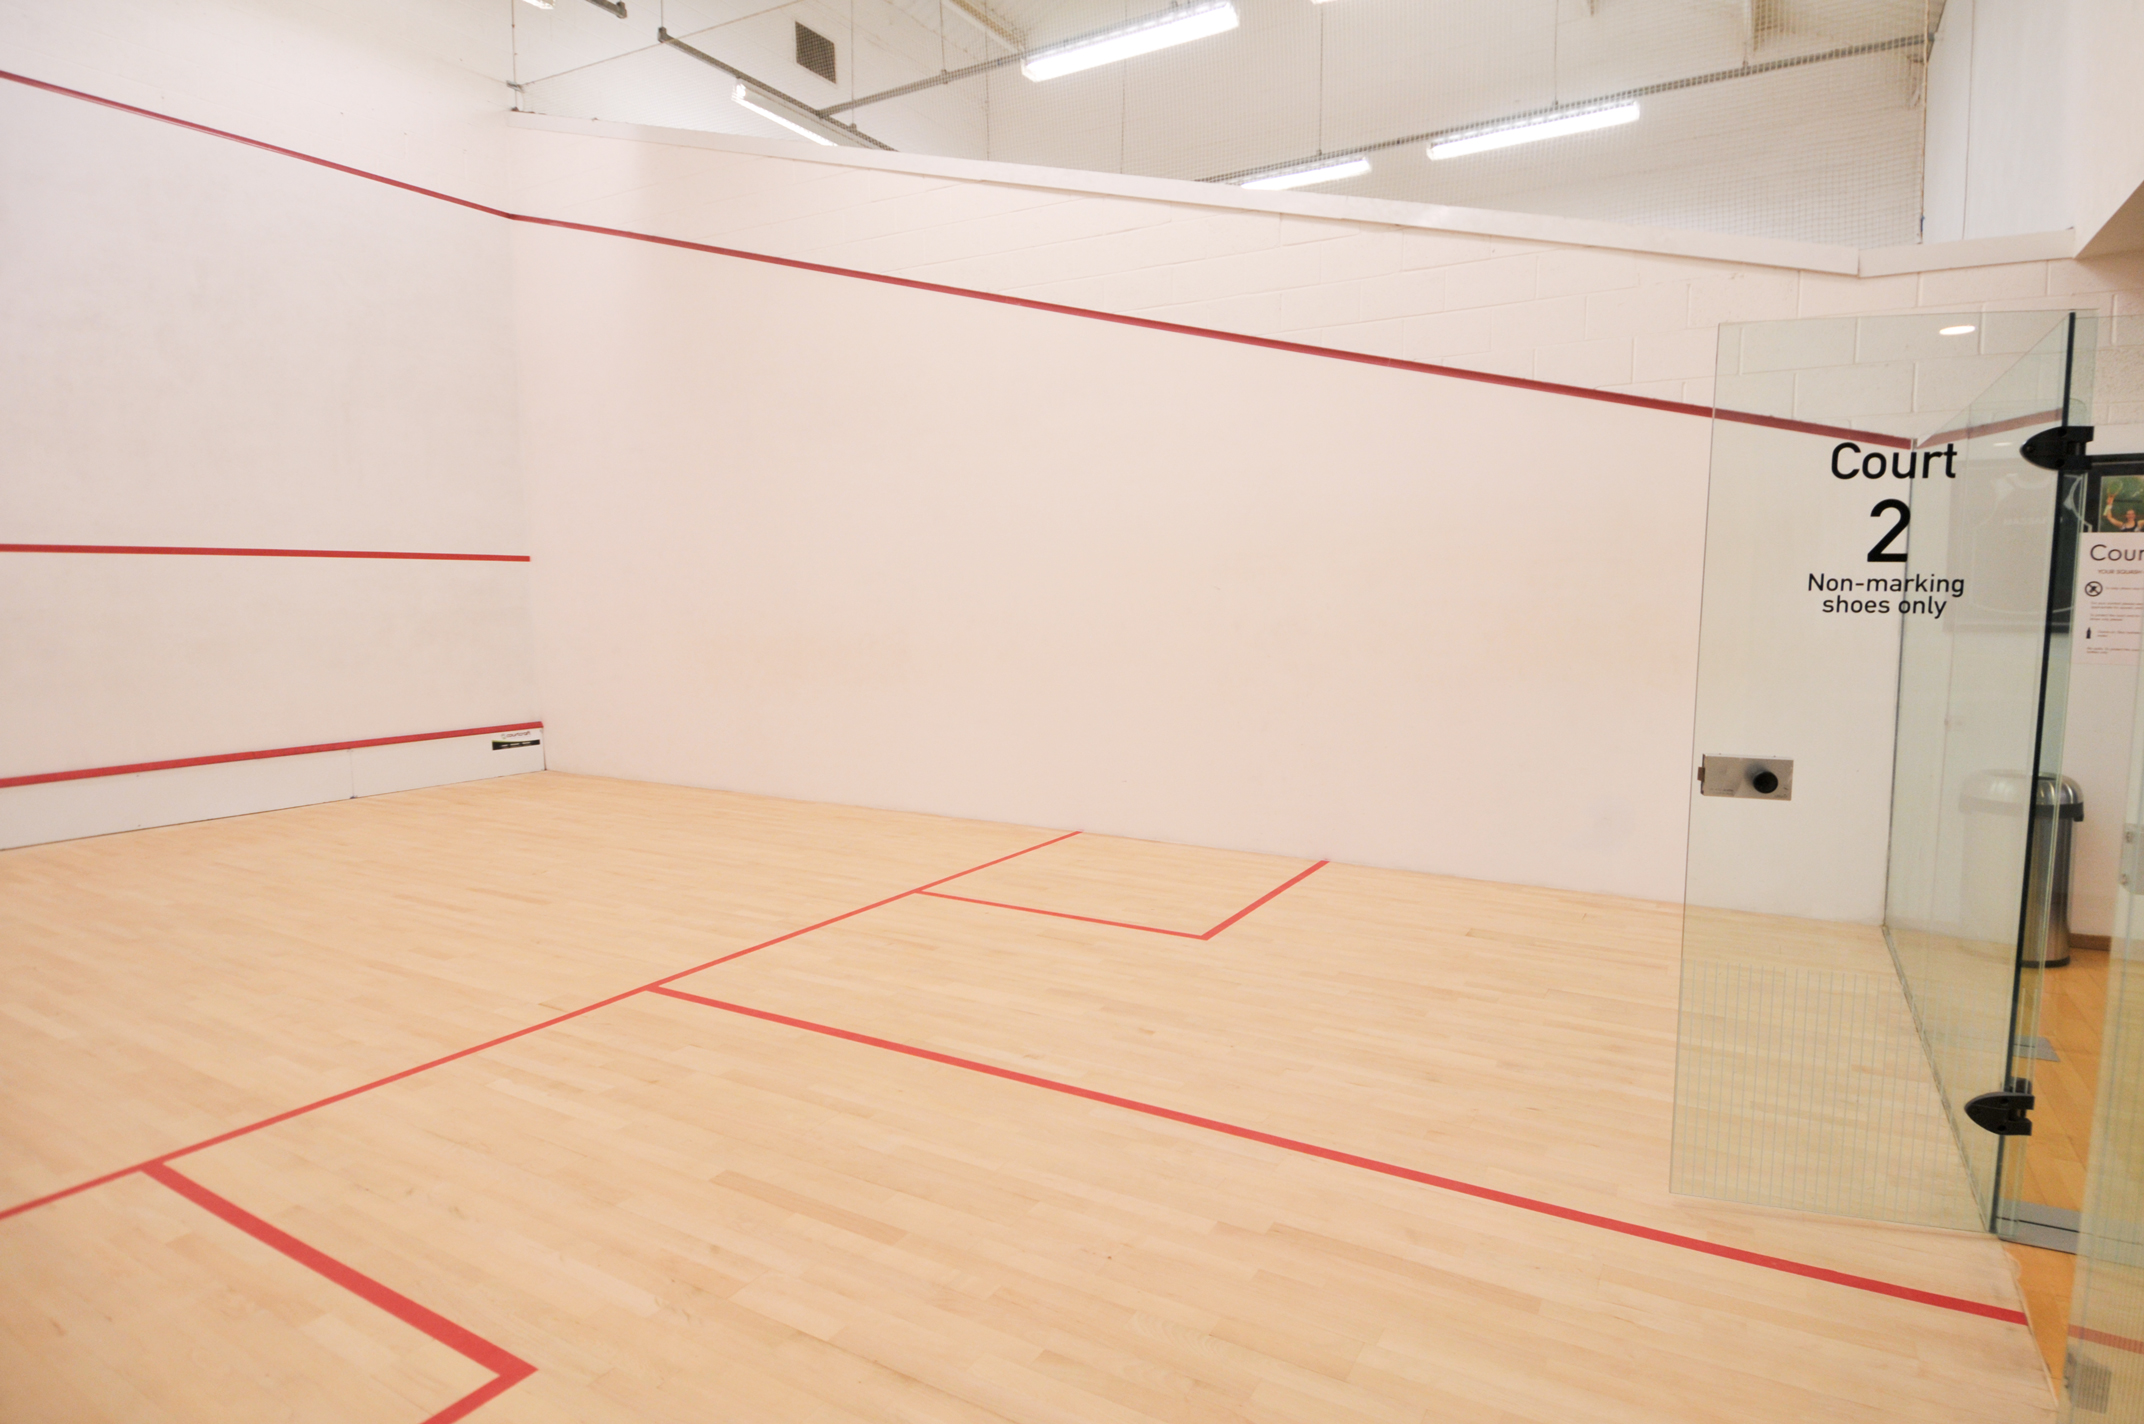 Plasterers Wanted for upcoming Squash Court job in the Midlands